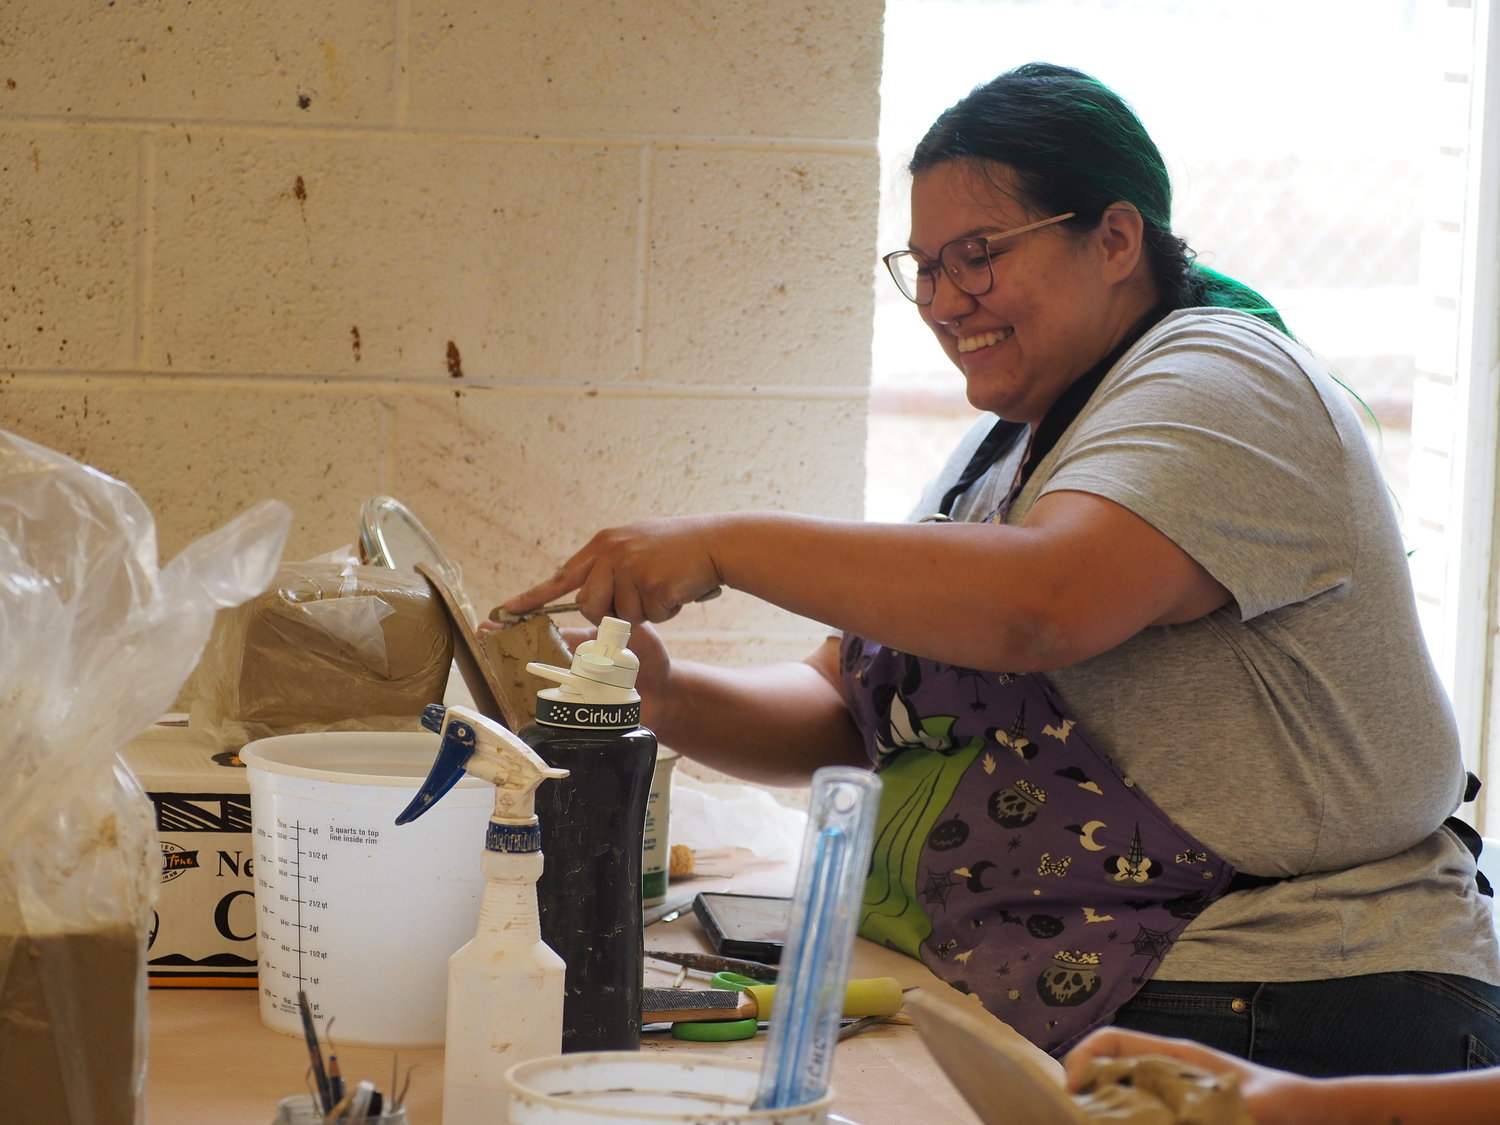 A workshop participant enjoys her clay project in the Western New Mexico University clay area.